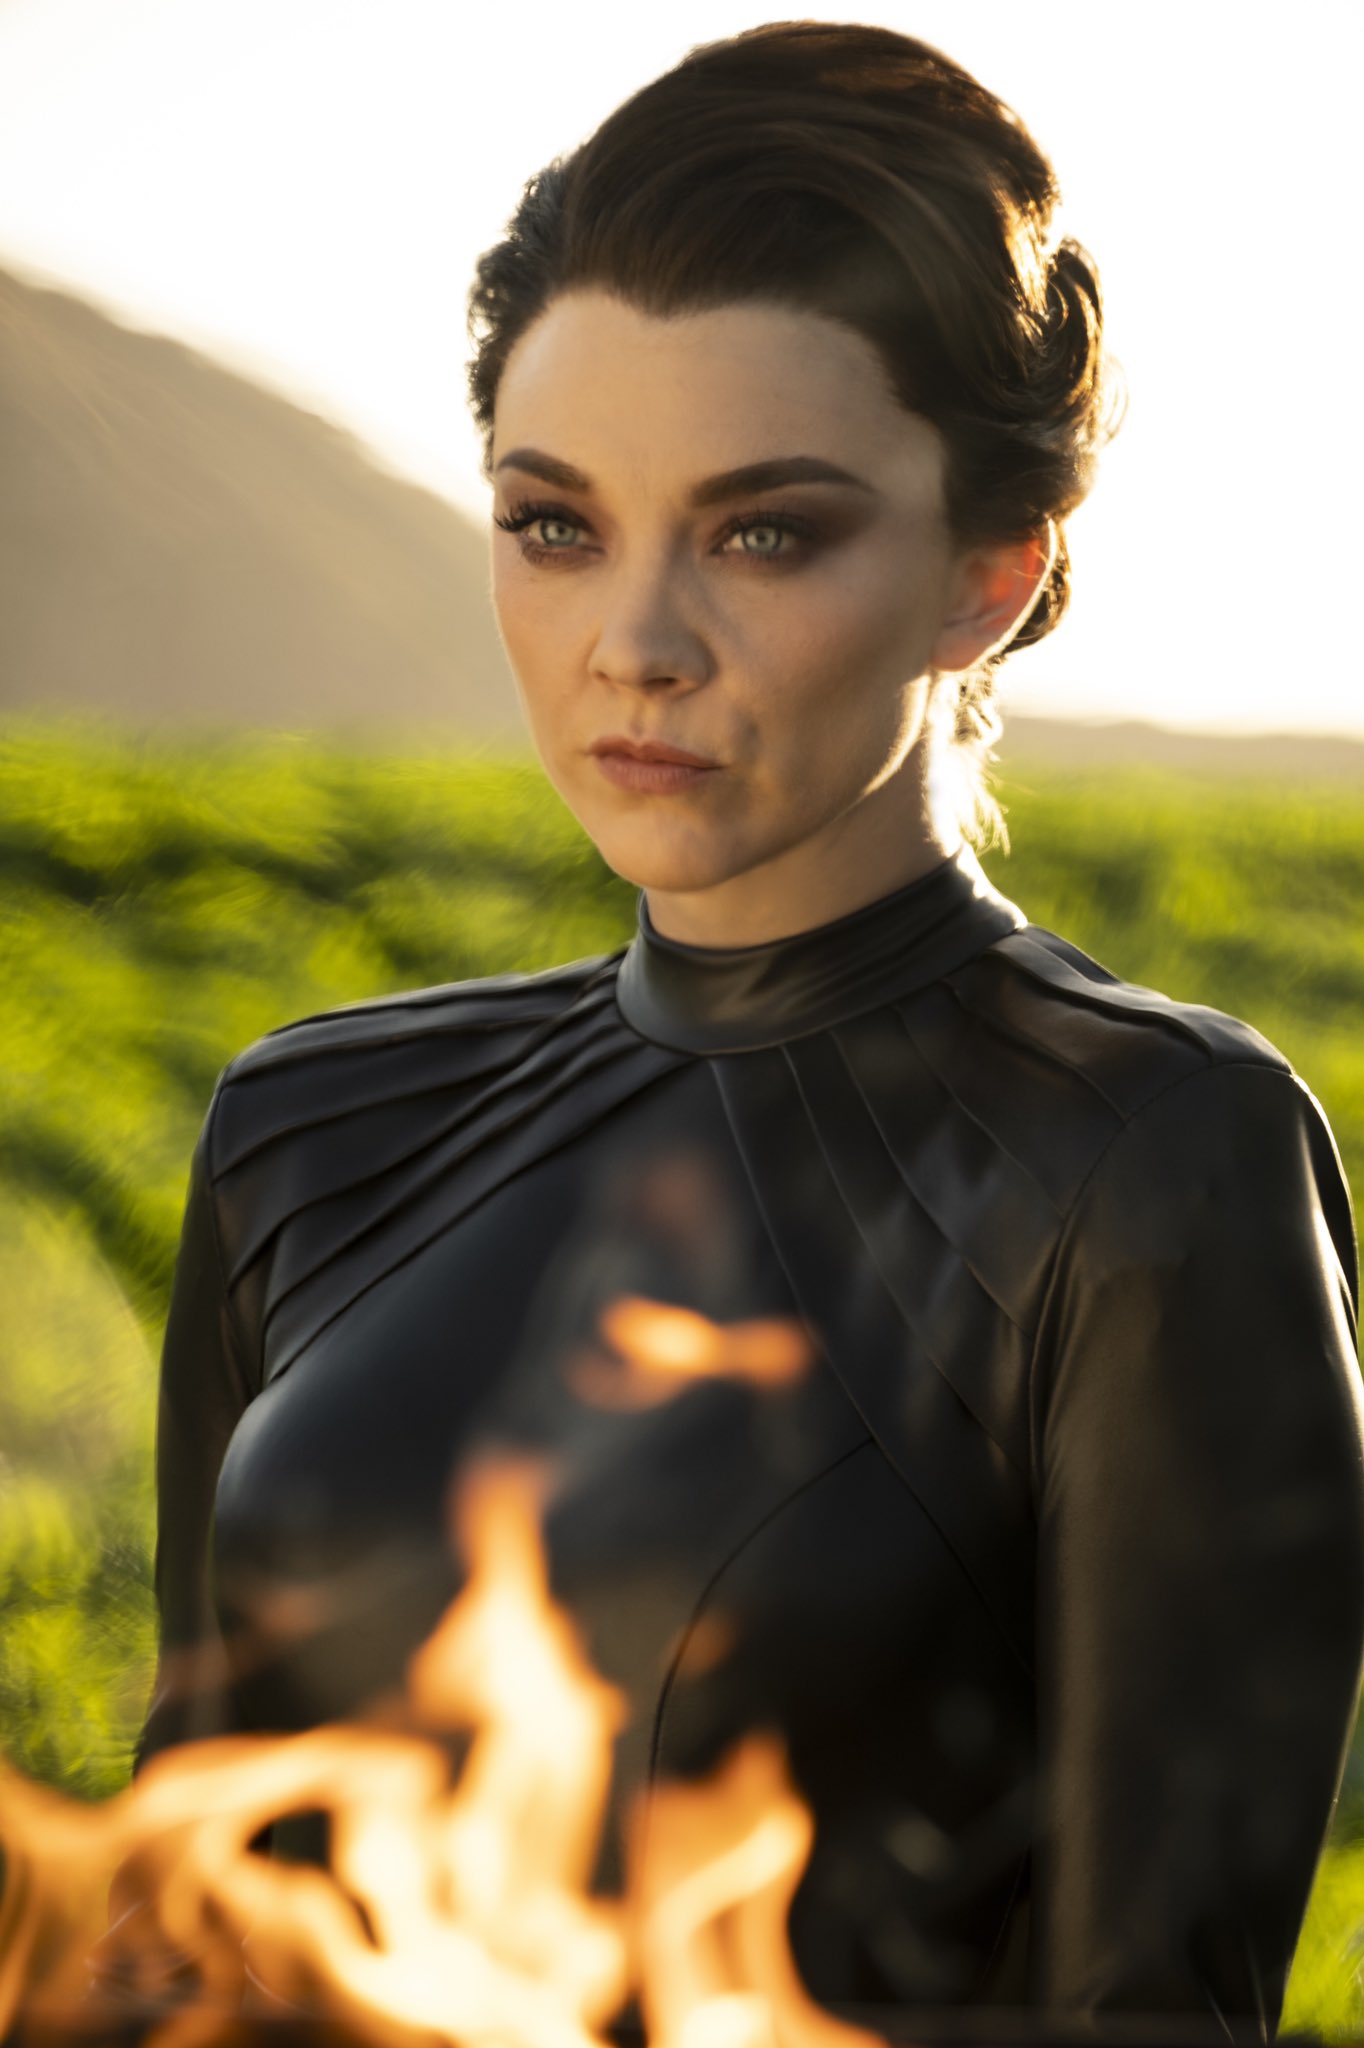 Natalie Dormer As Magda Penny Dreadful Wallpapers